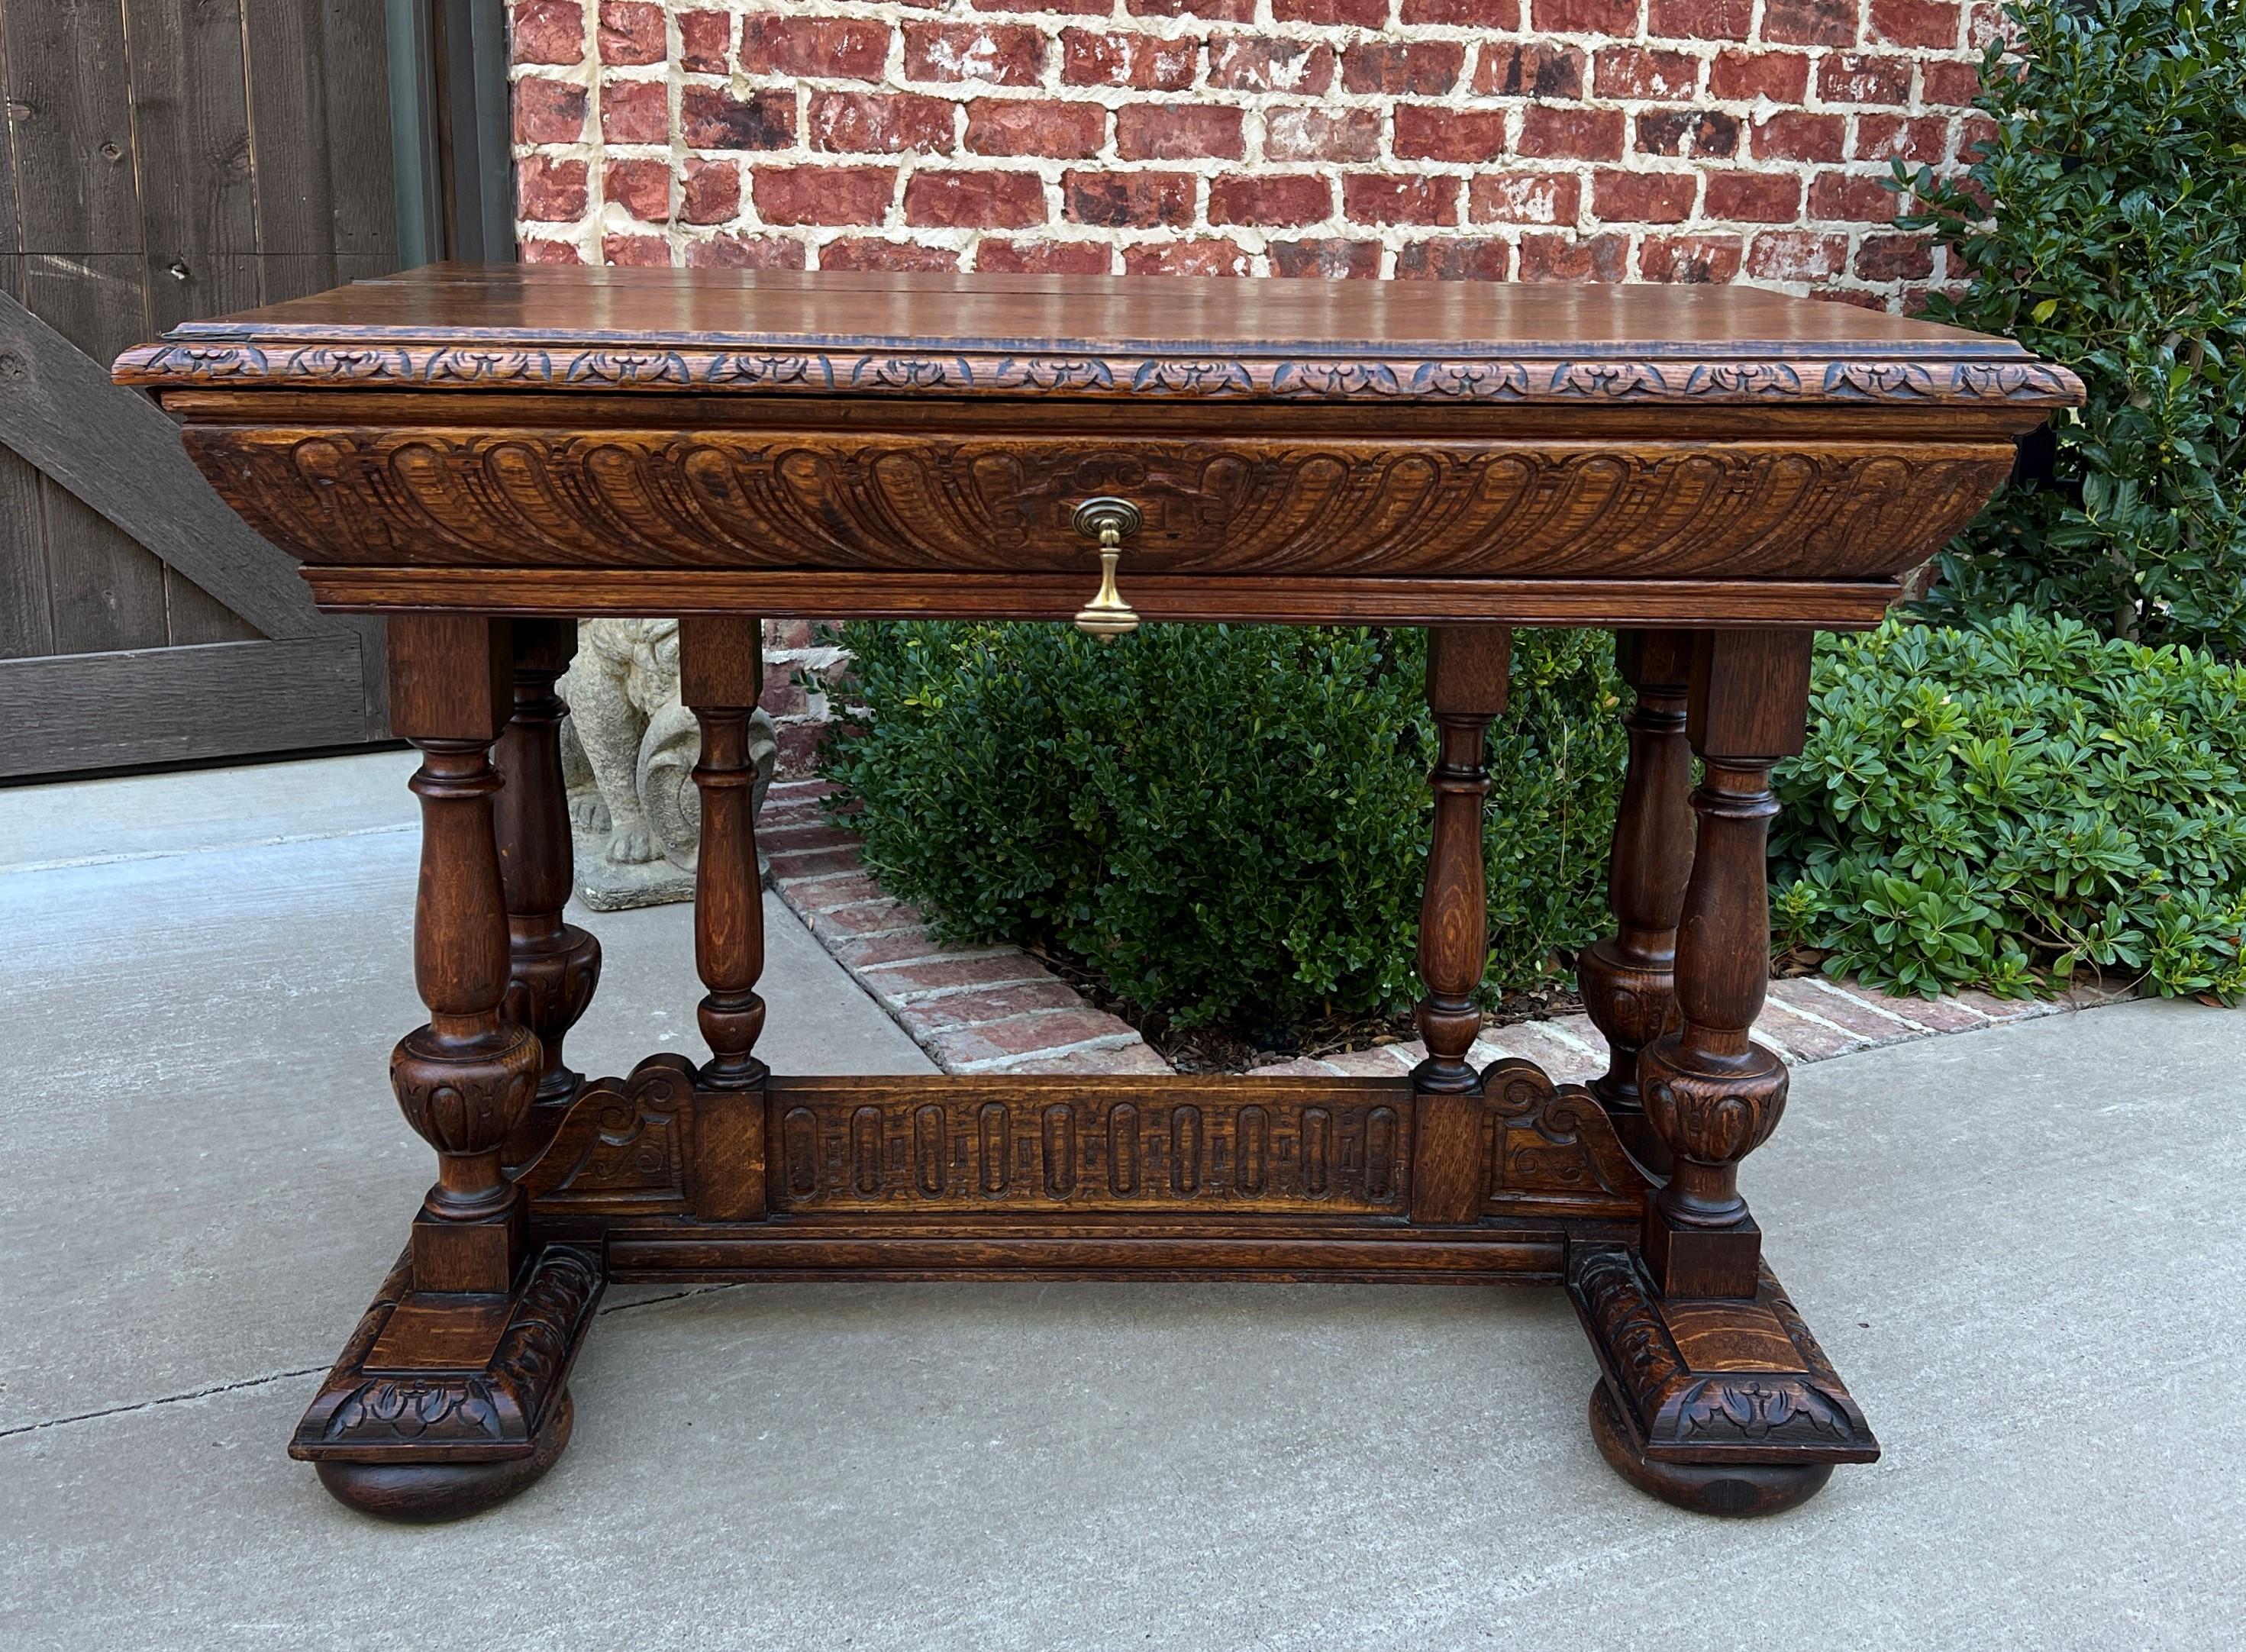 Beautiful versatile size antique French oak renaissance revival writing desk or table with drawer and double pedestal.
~~c. 1890

With so many people working from home now, DESKS have become our most often requested items this year~~this is a